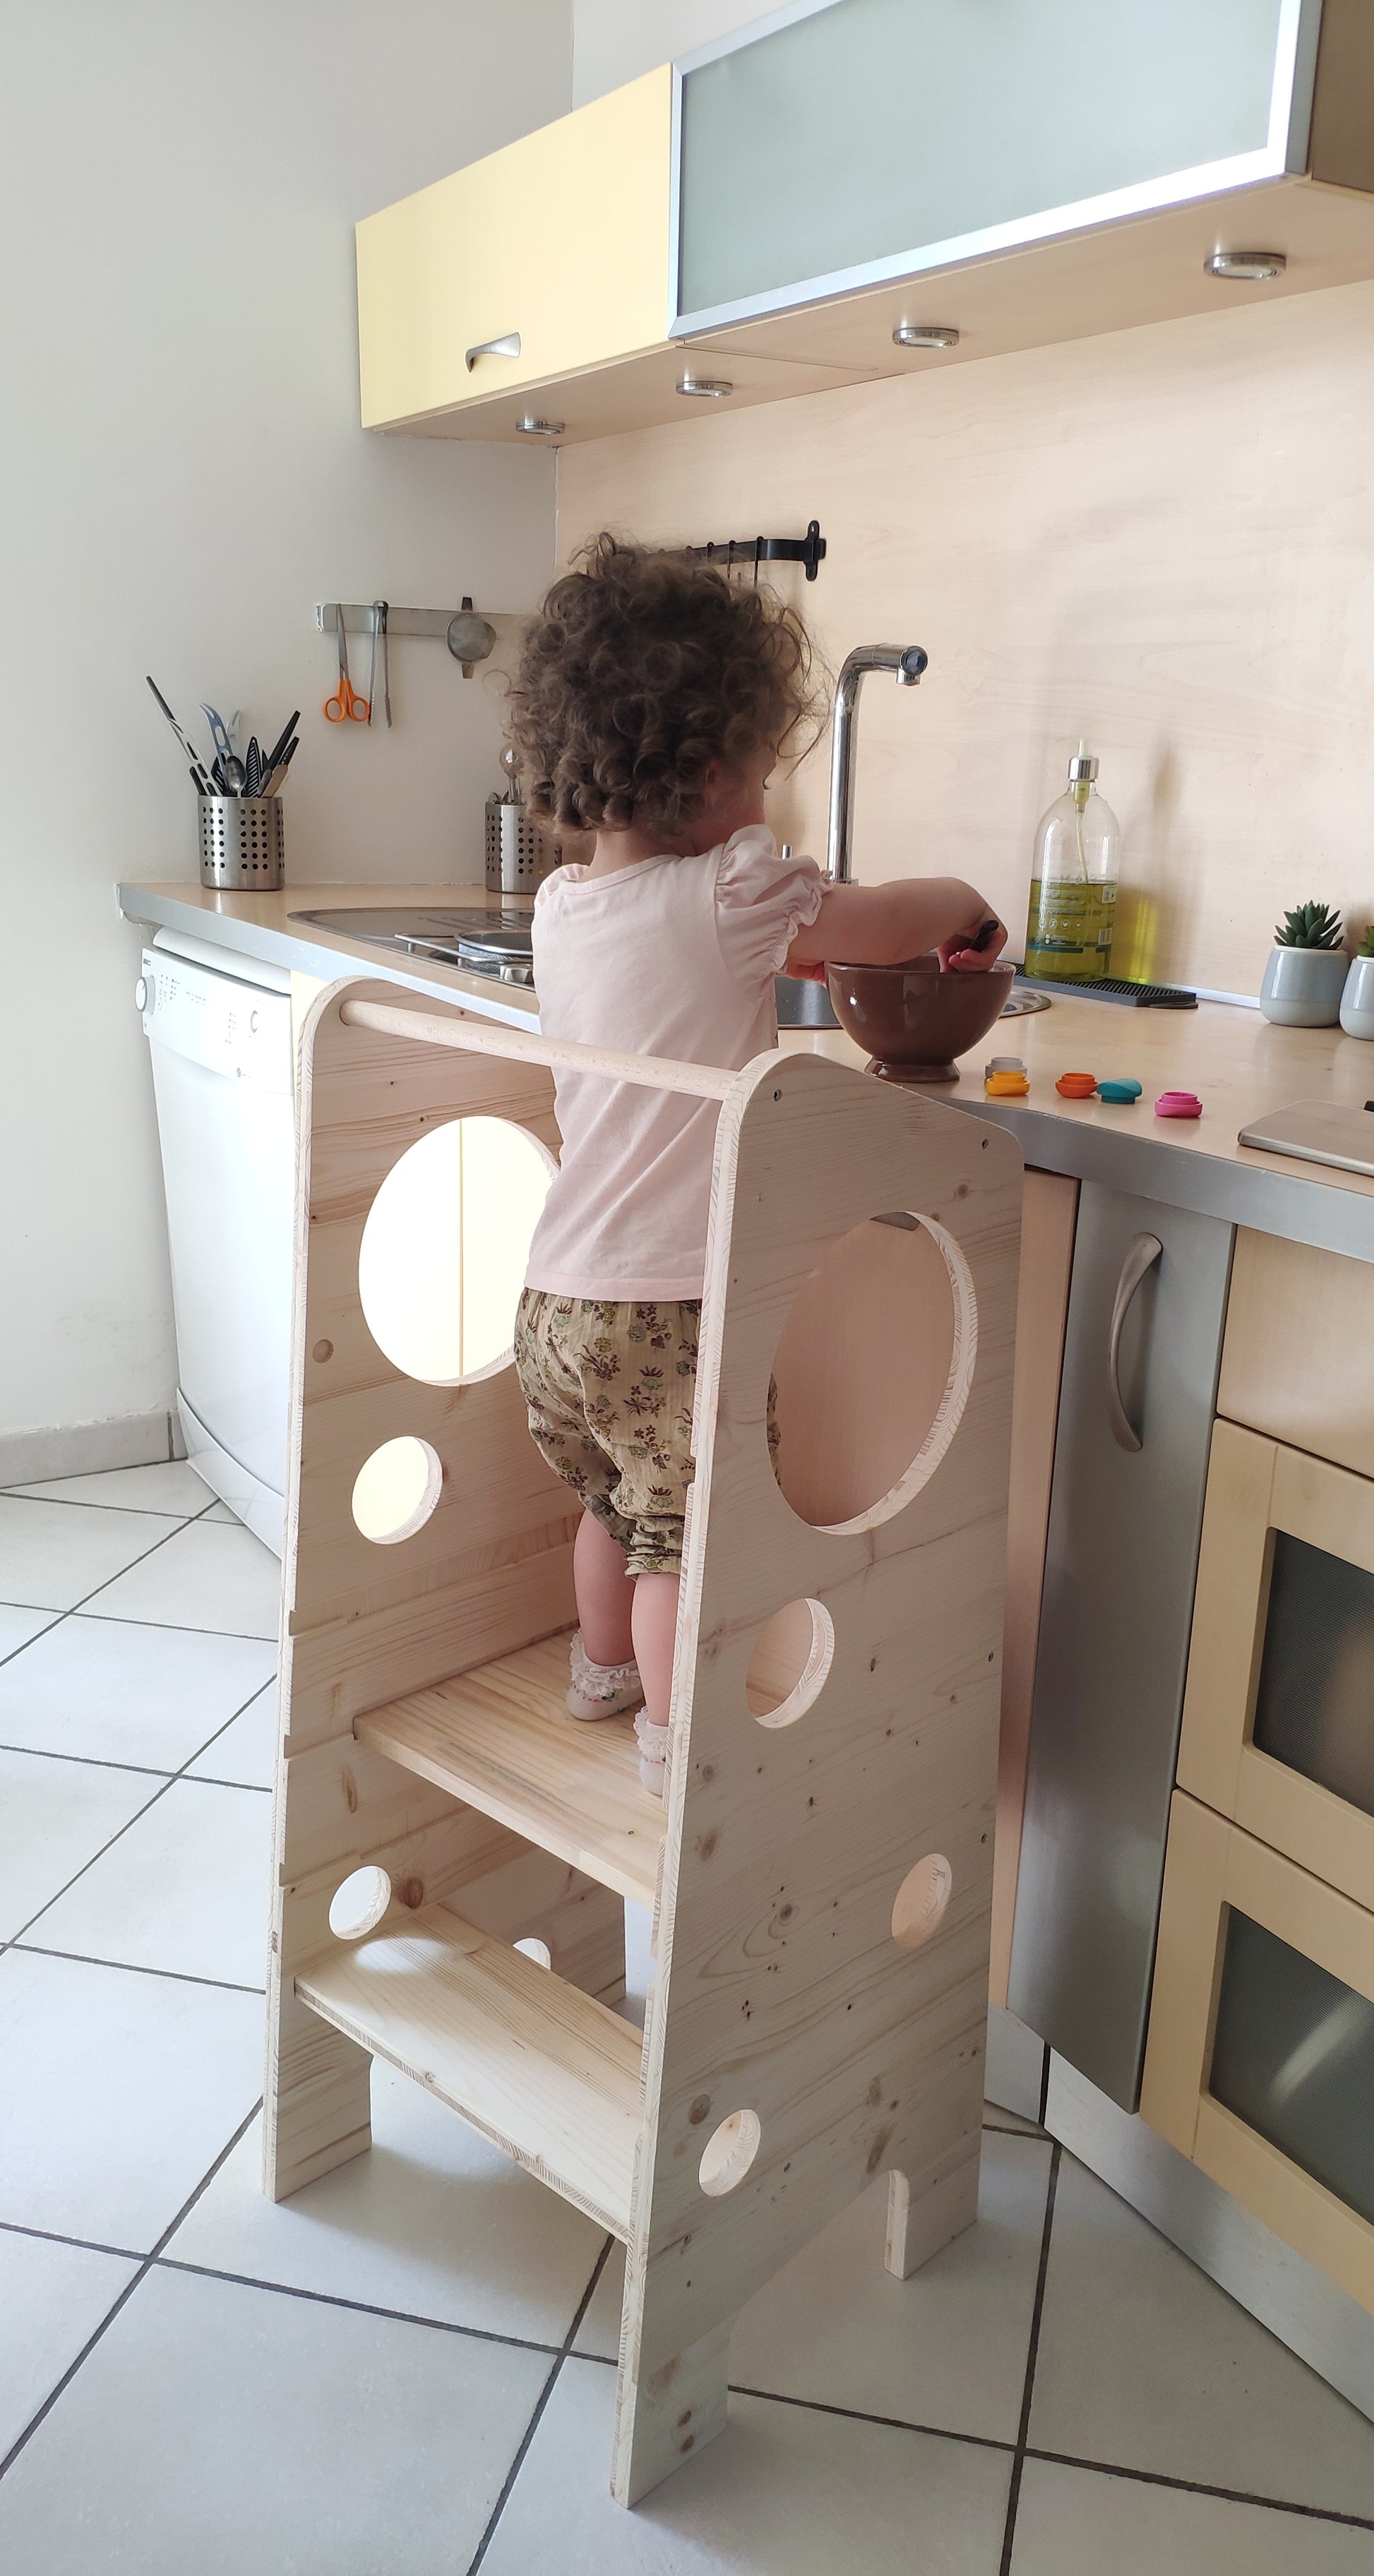 Scalable Montessori-inspired learning tower - FIL Mobilier